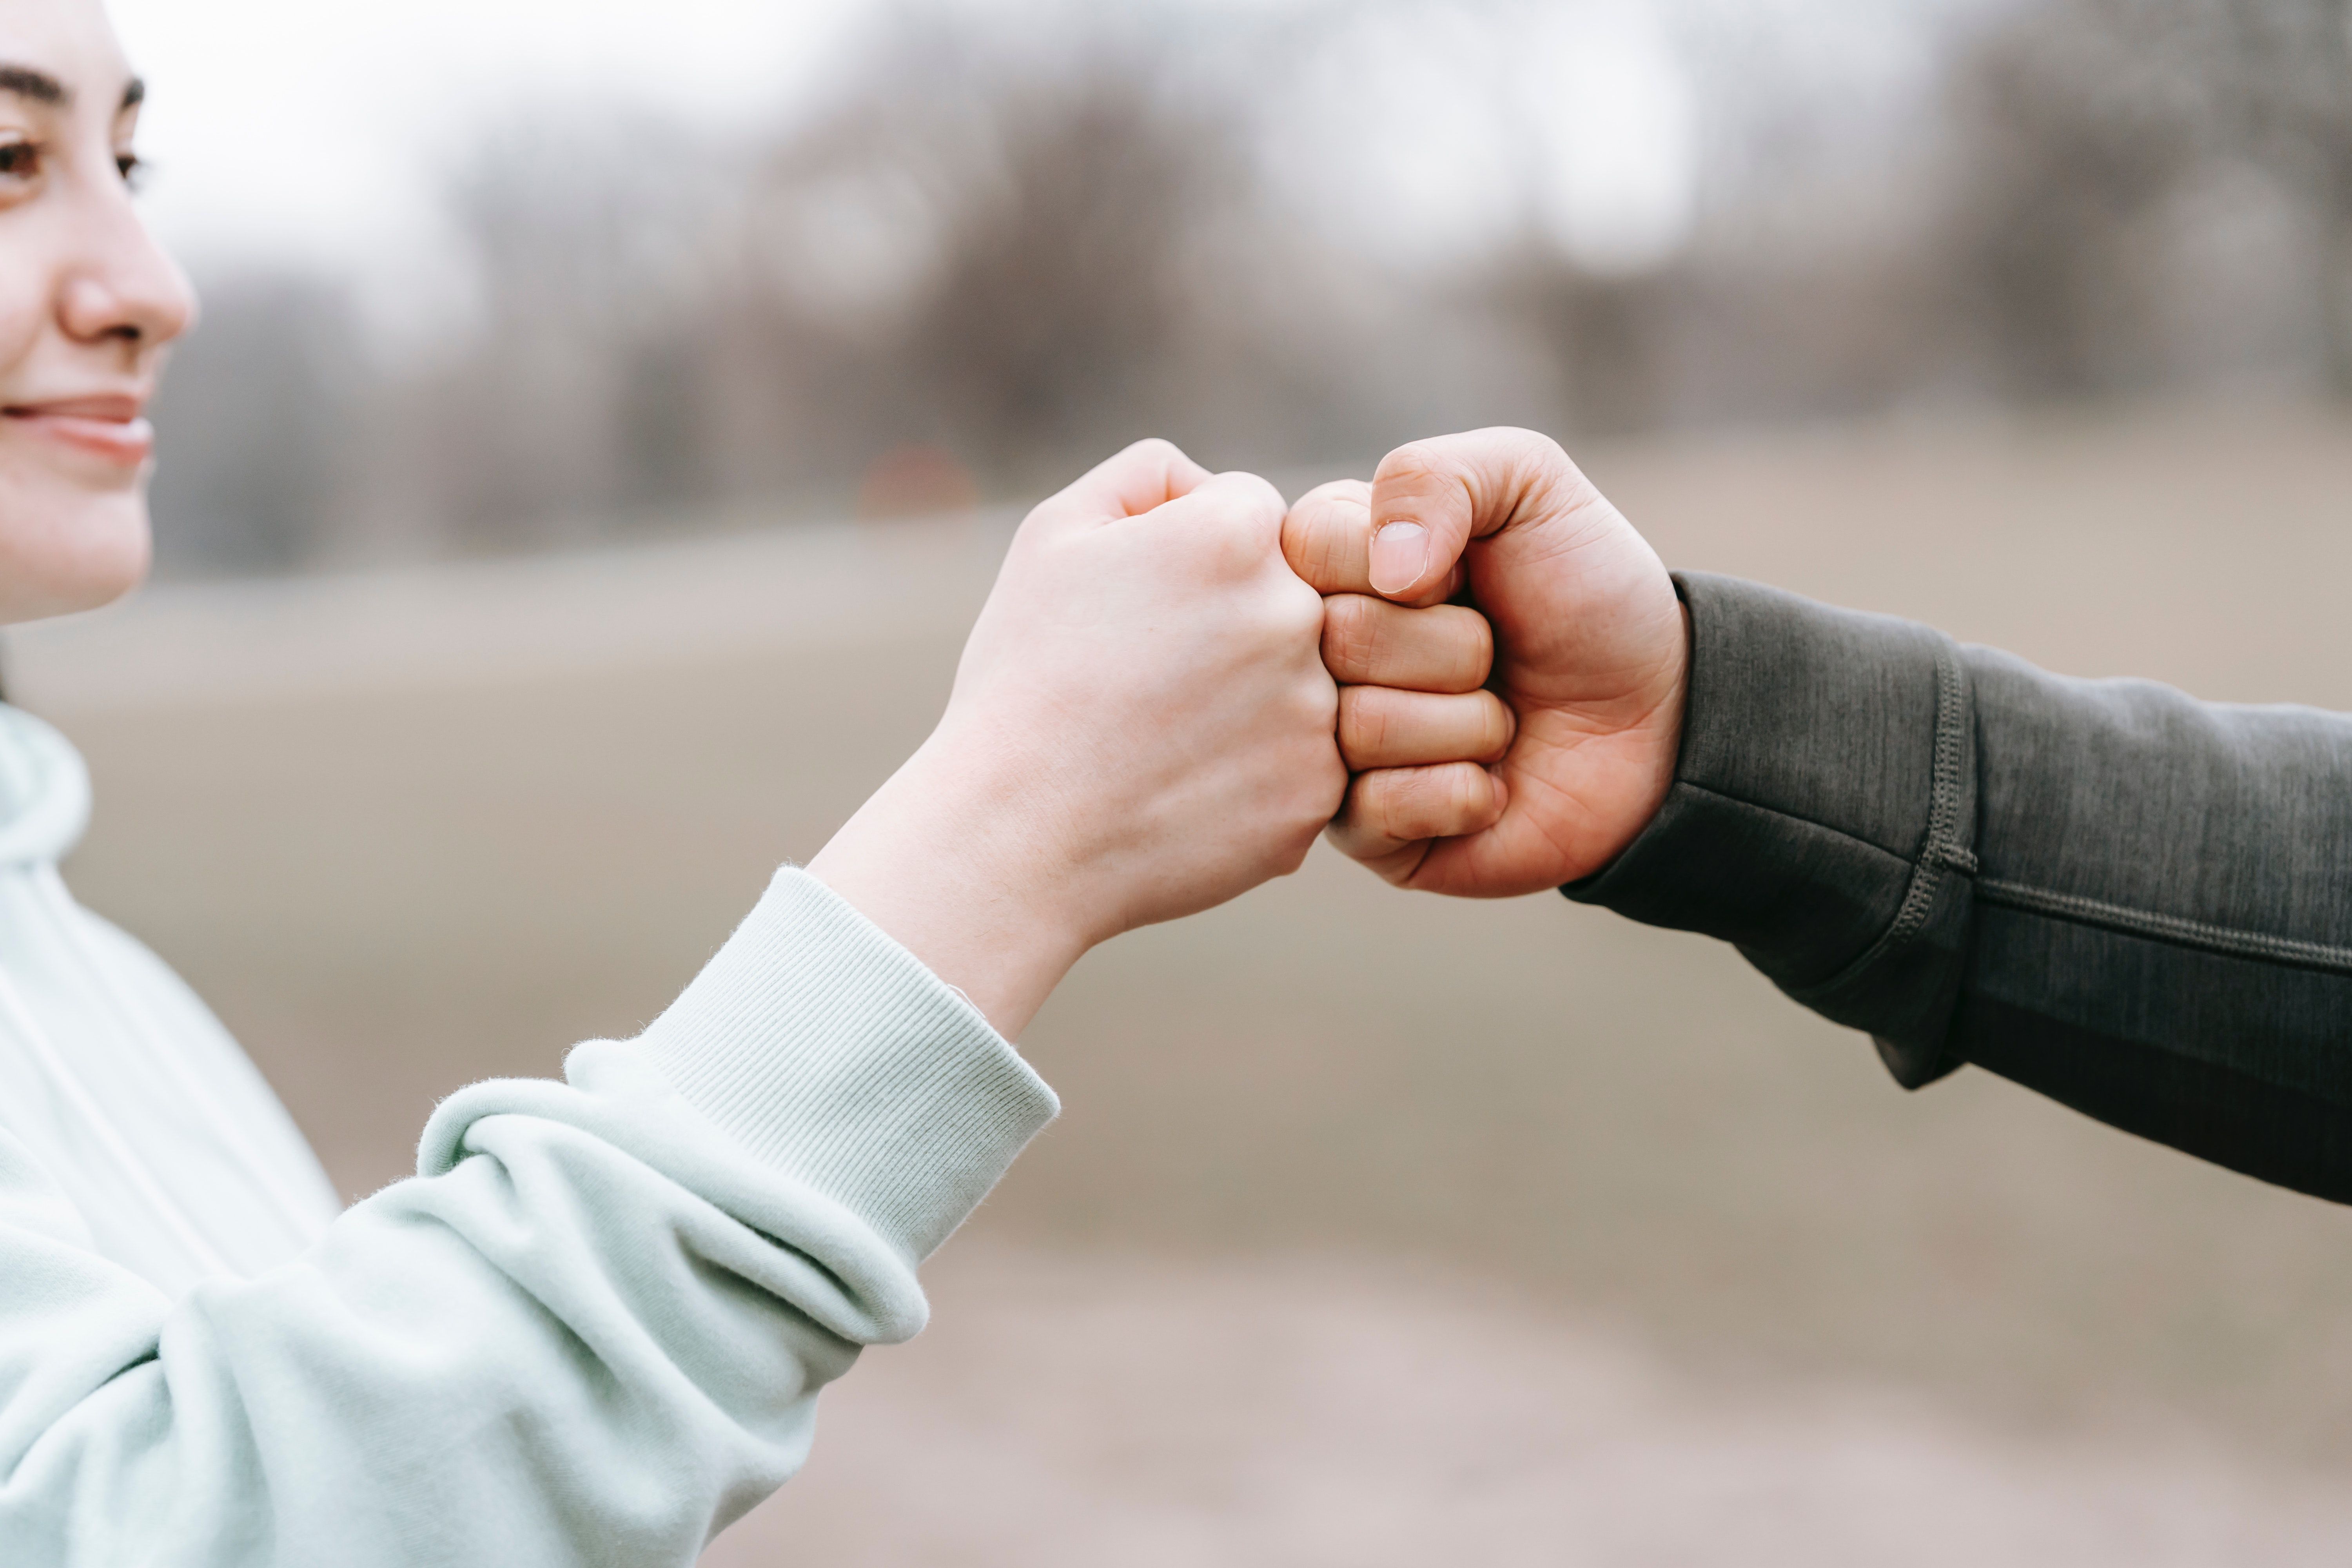 A man and a woman fist bumping each other